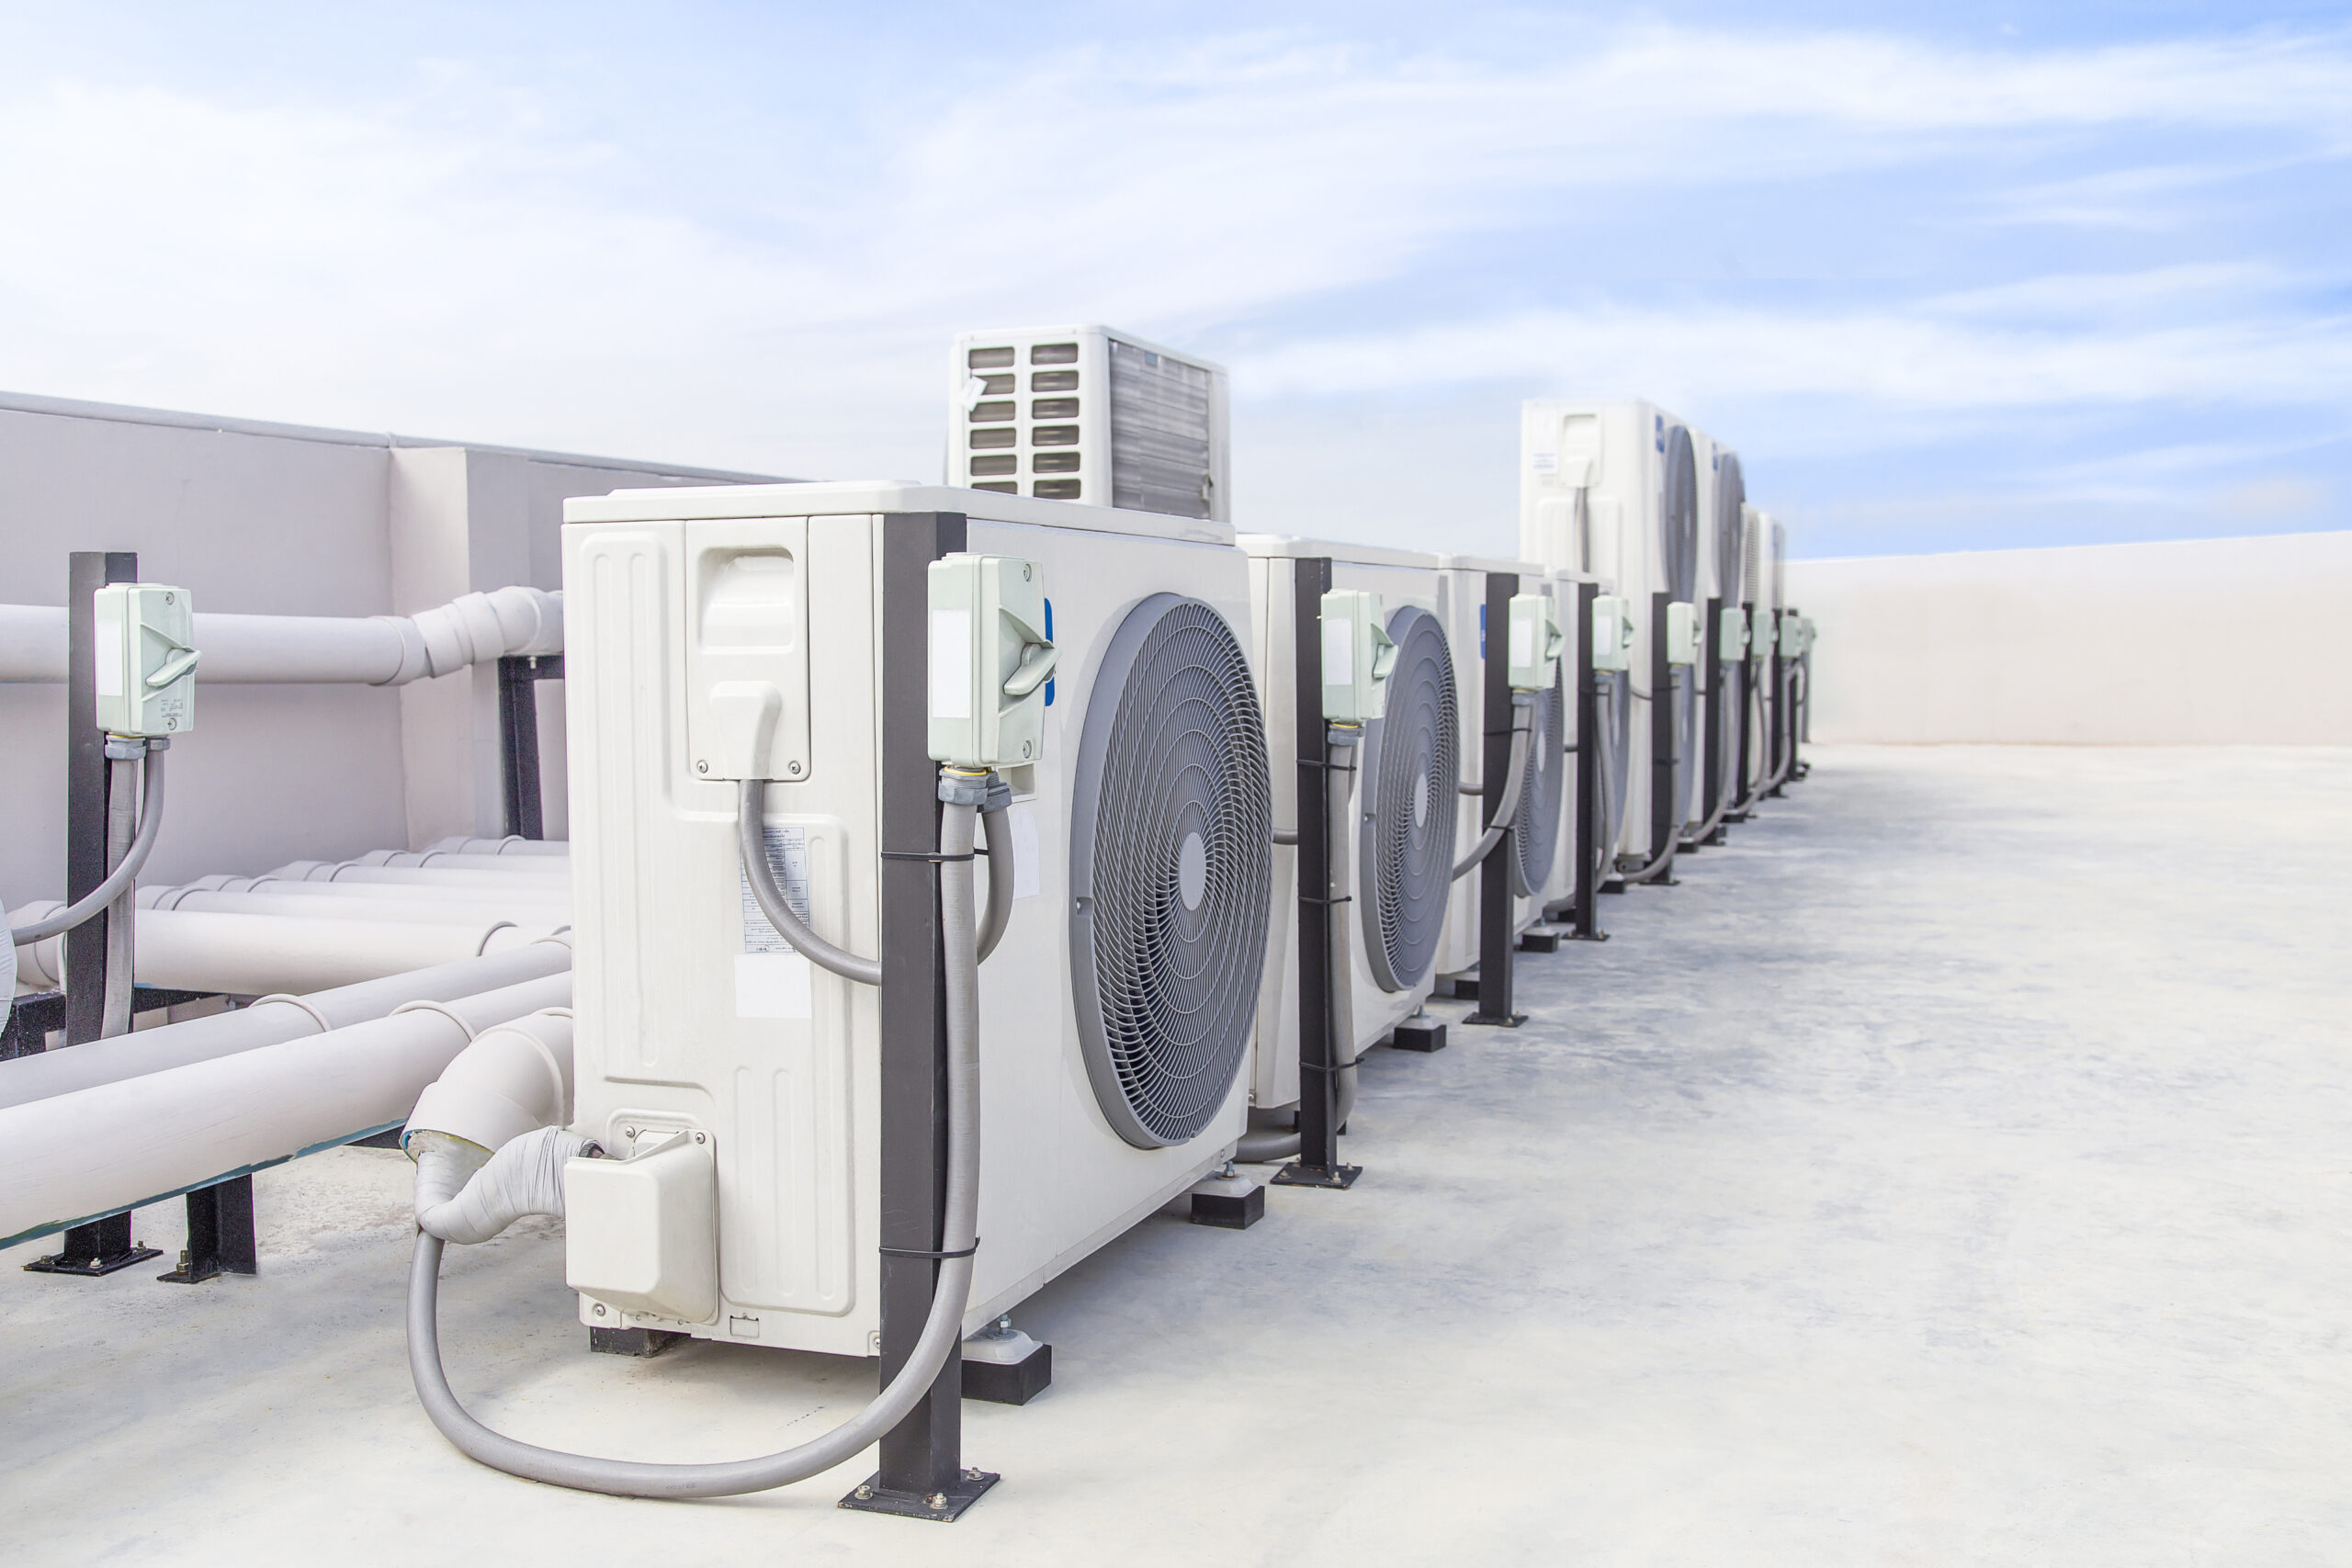 Air conditioning (HVAC) installed on the roof of industrial building